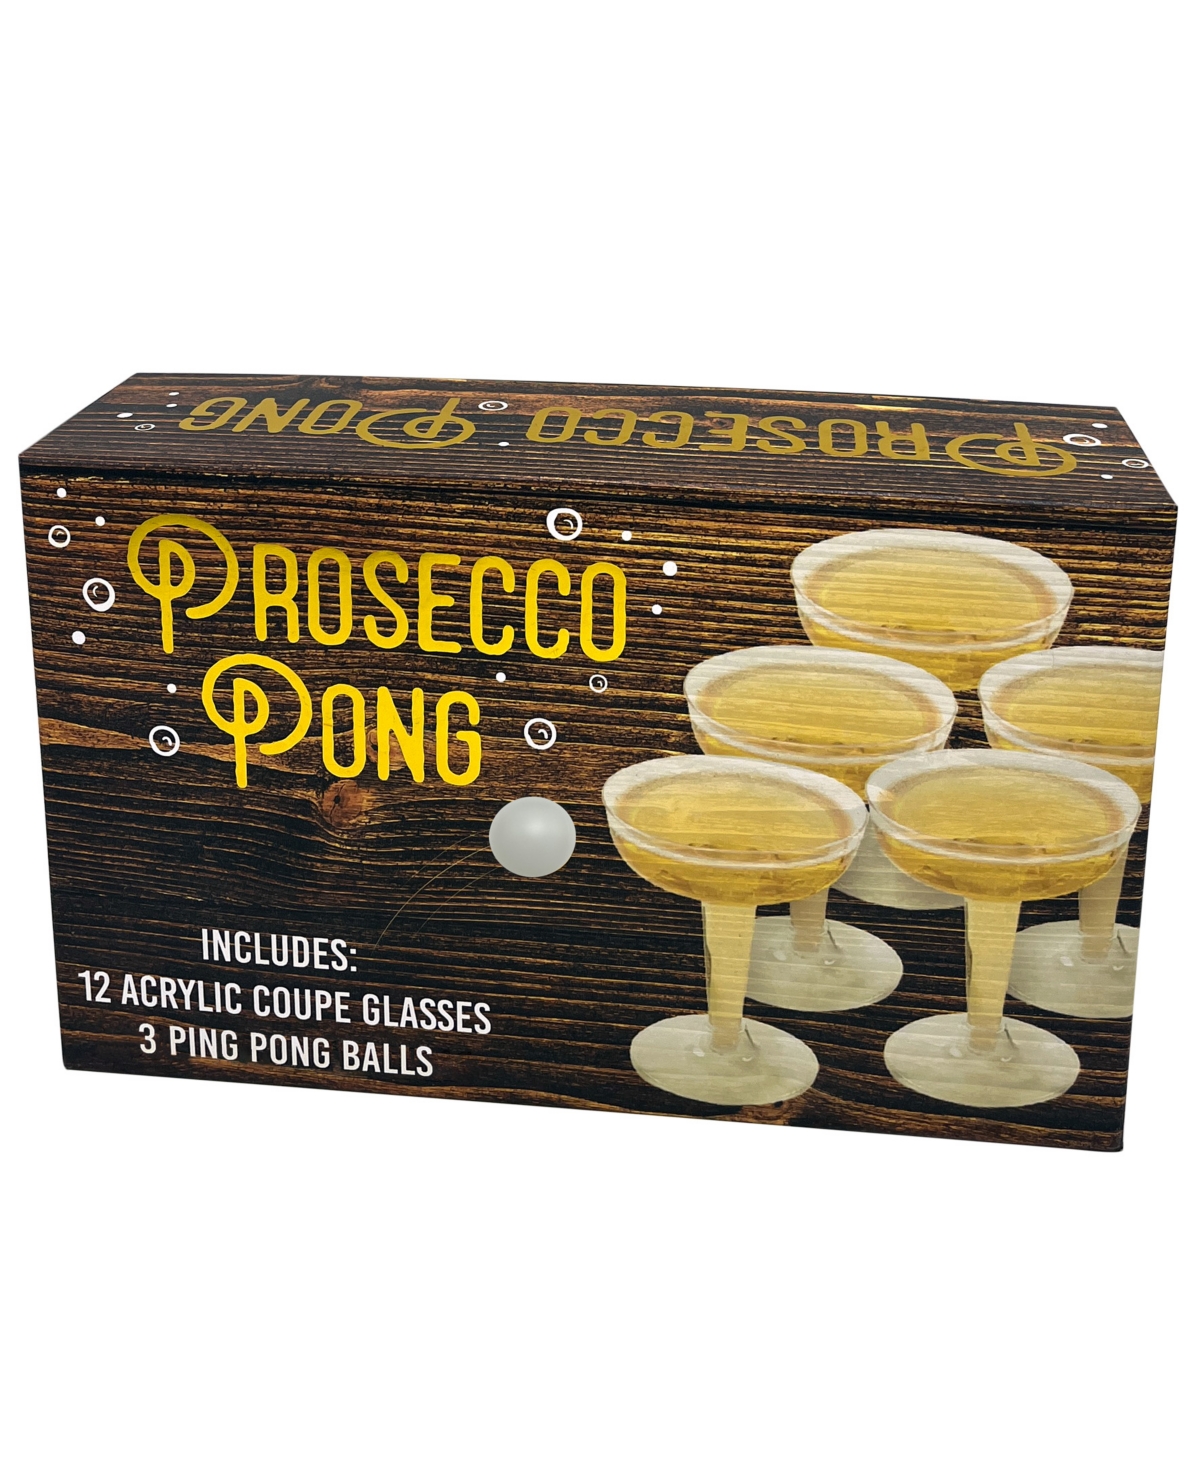 Tmd Holdings Wood Grain Prosecco Pong Boxed Game With 12 Acrylic Coupe Cups And 3 Ping Pong Balls 4.5 Oz, 133ml In Gold